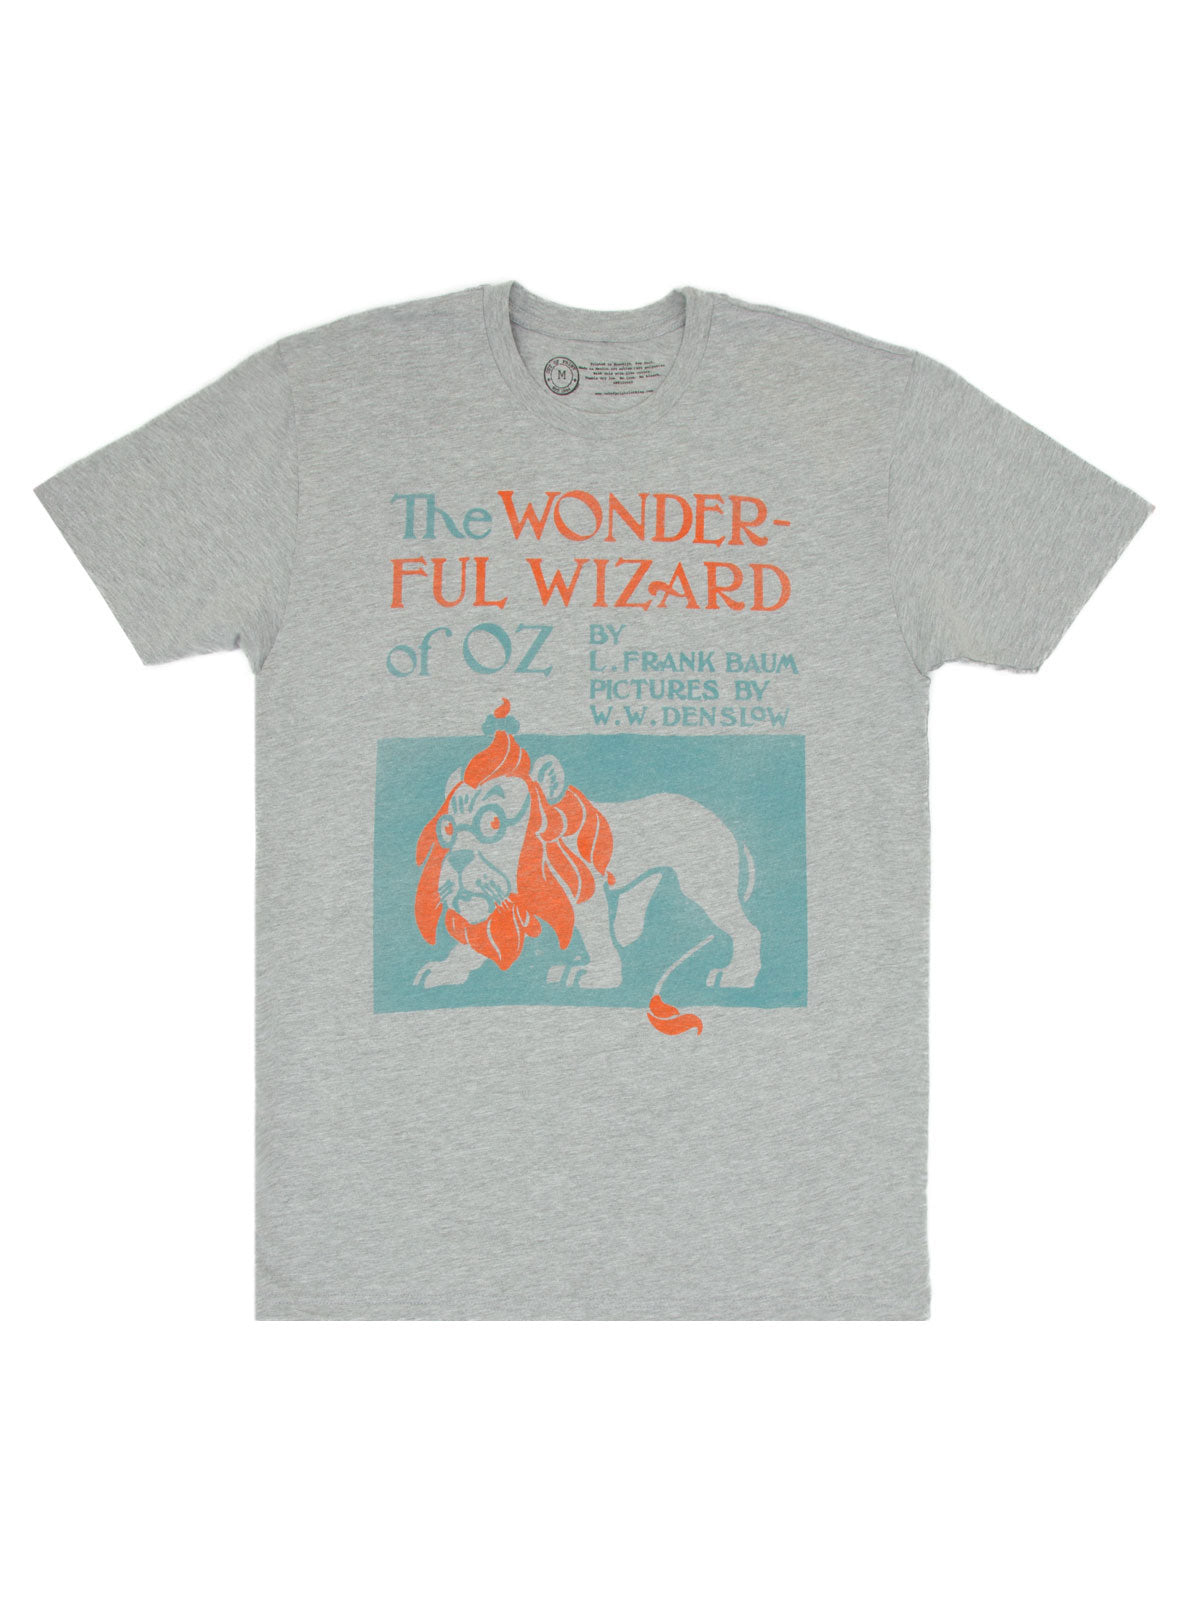 The Wonderful Wizard of Oz men's t-shirt — Out of Print